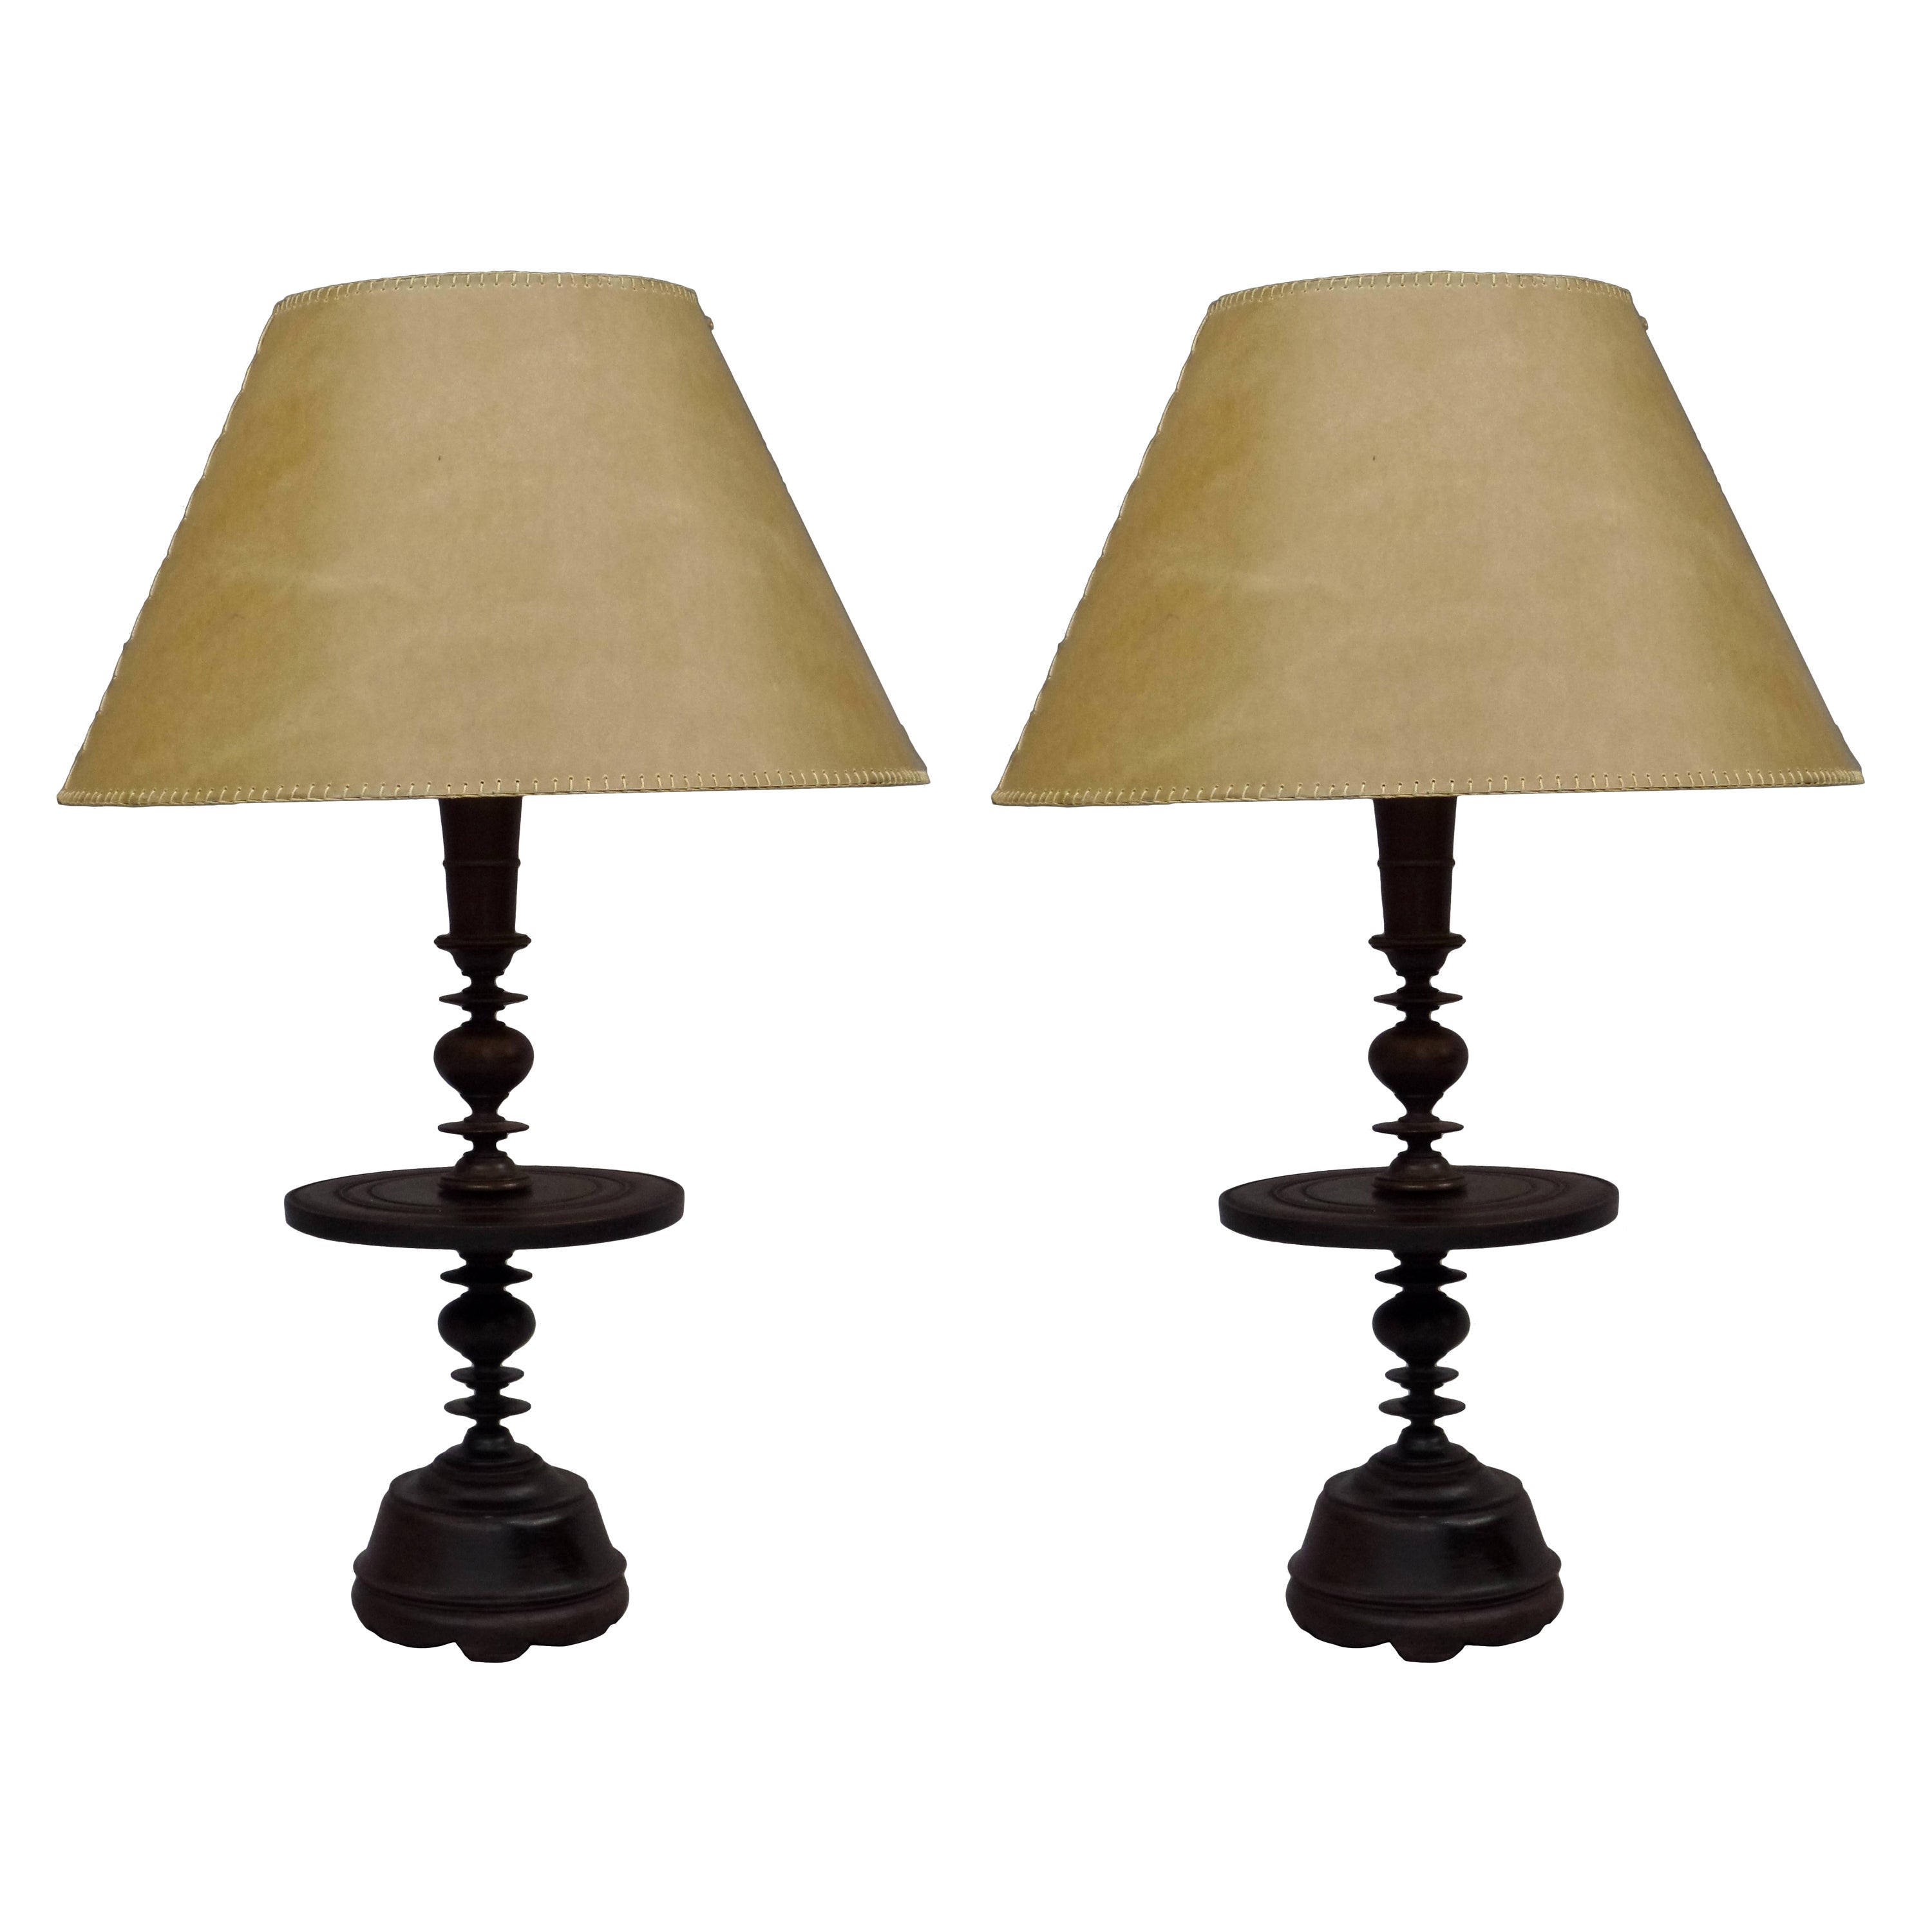 Pair of French Colonial Mid-Century Carved Wood Table Lamp Bases, 1930